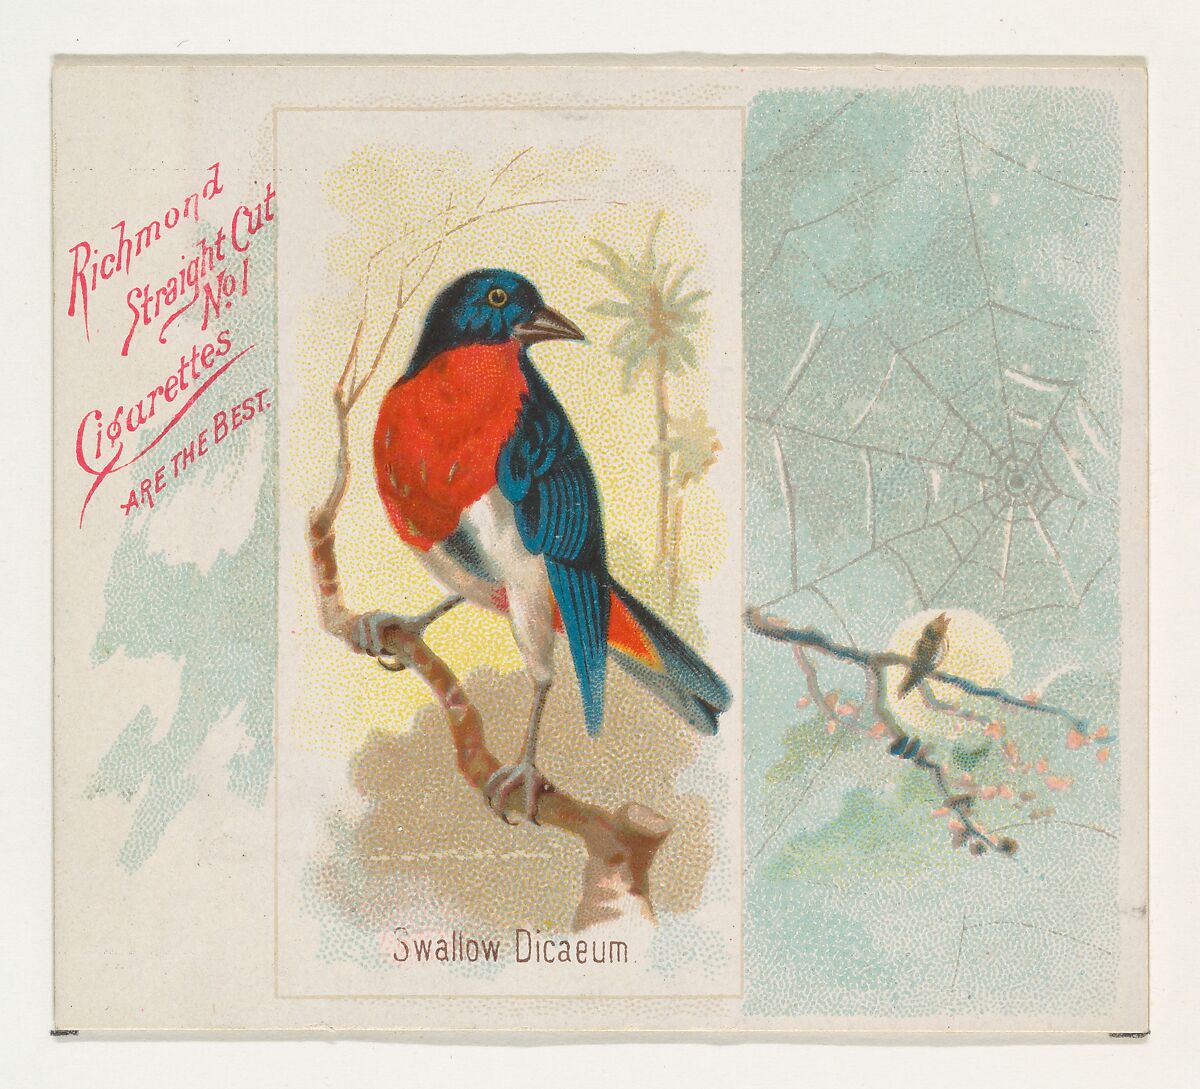 Swallow Dicaeum, from the Song Birds of the World series (N42) for Allen & Ginter Cigarettes, Issued by Allen &amp; Ginter (American, Richmond, Virginia), Commercial color lithograph 